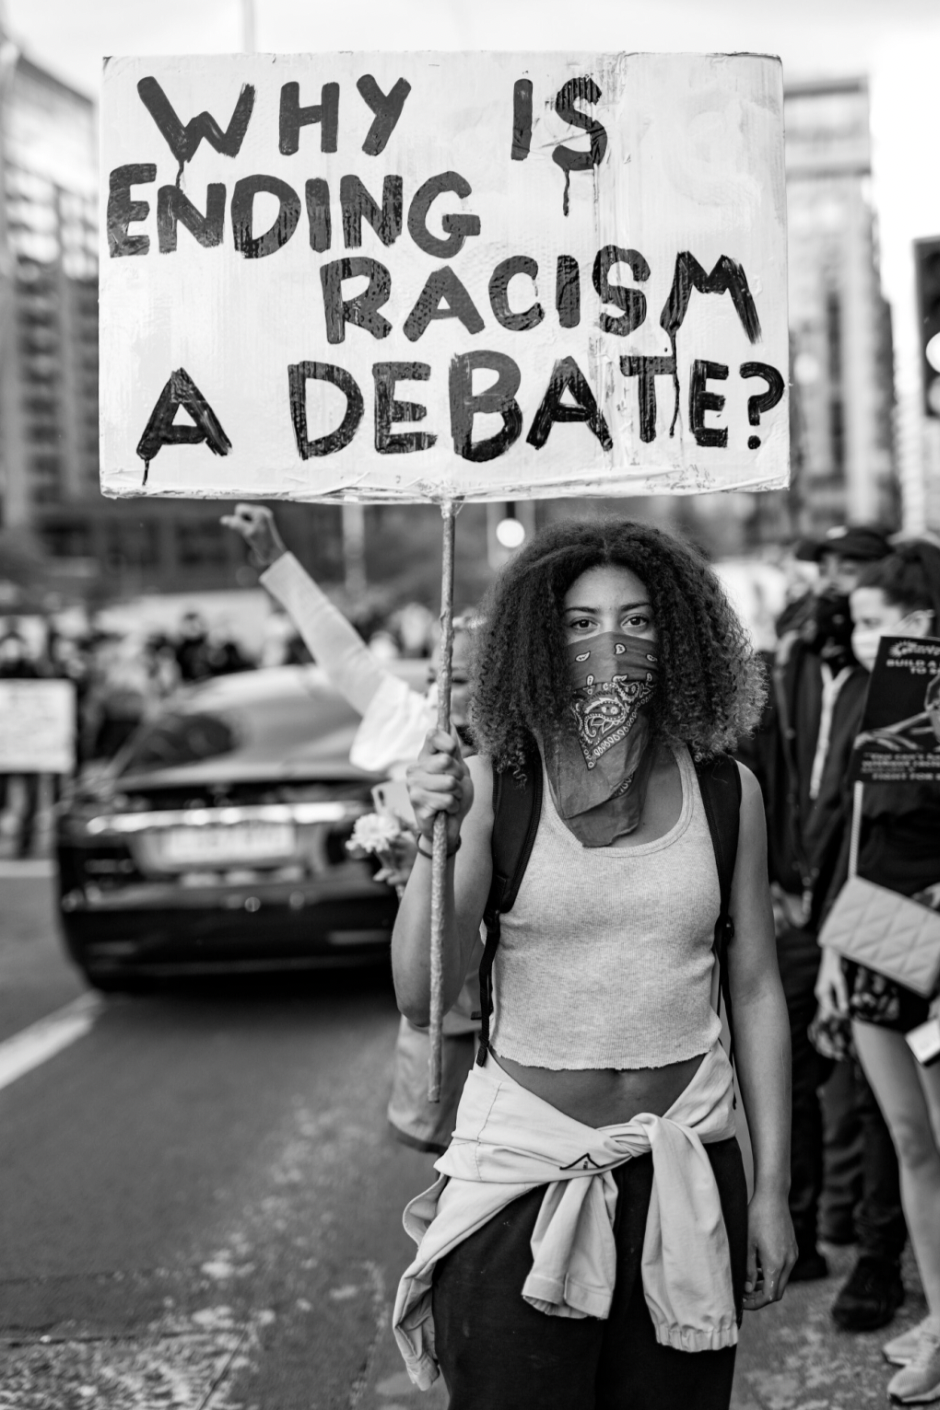 A black and white photograph of a woman wearing a bandana over her face holding a sign that says "Why is ending racism a debate?"